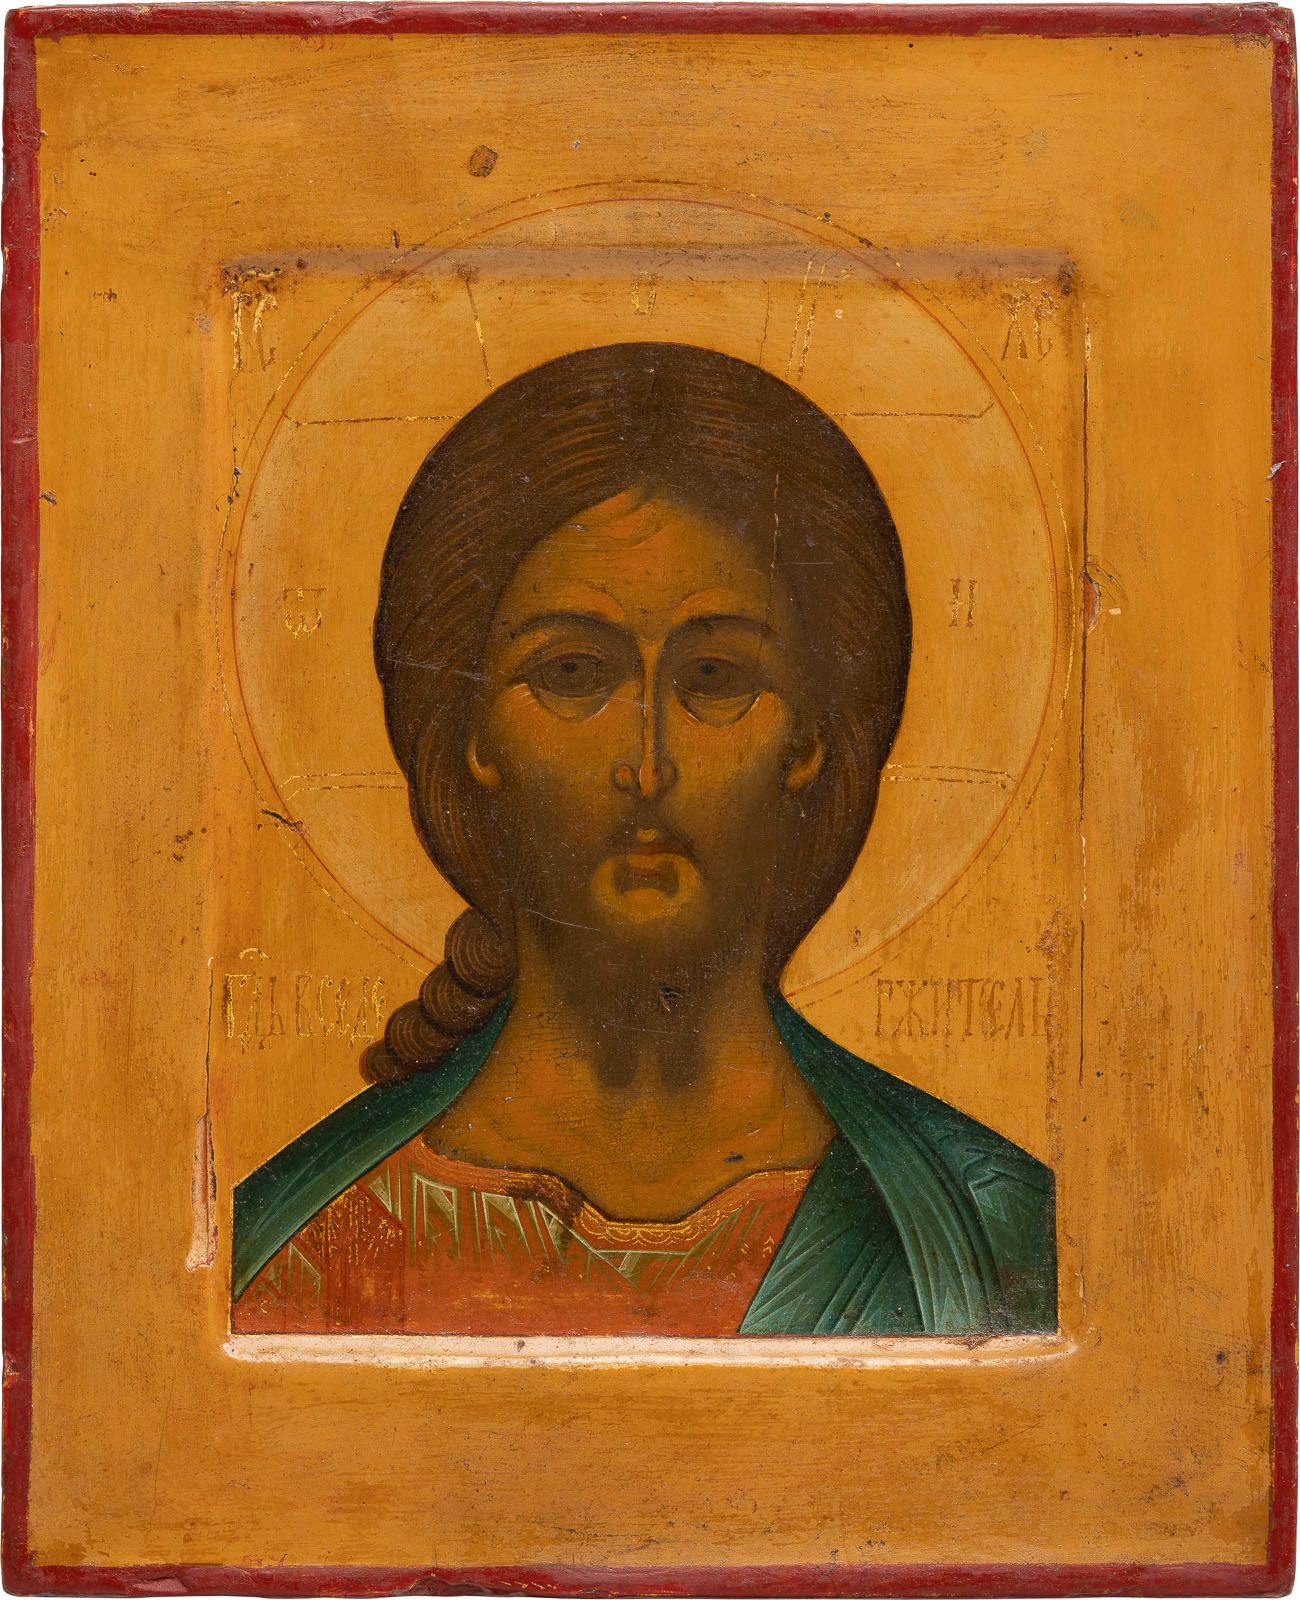 A SMALL ICON SHOWING CHRIST 'WITH THE FEARSOME EYE' PETITE ICÔNE REPRÉSENTANT LE&hellip;